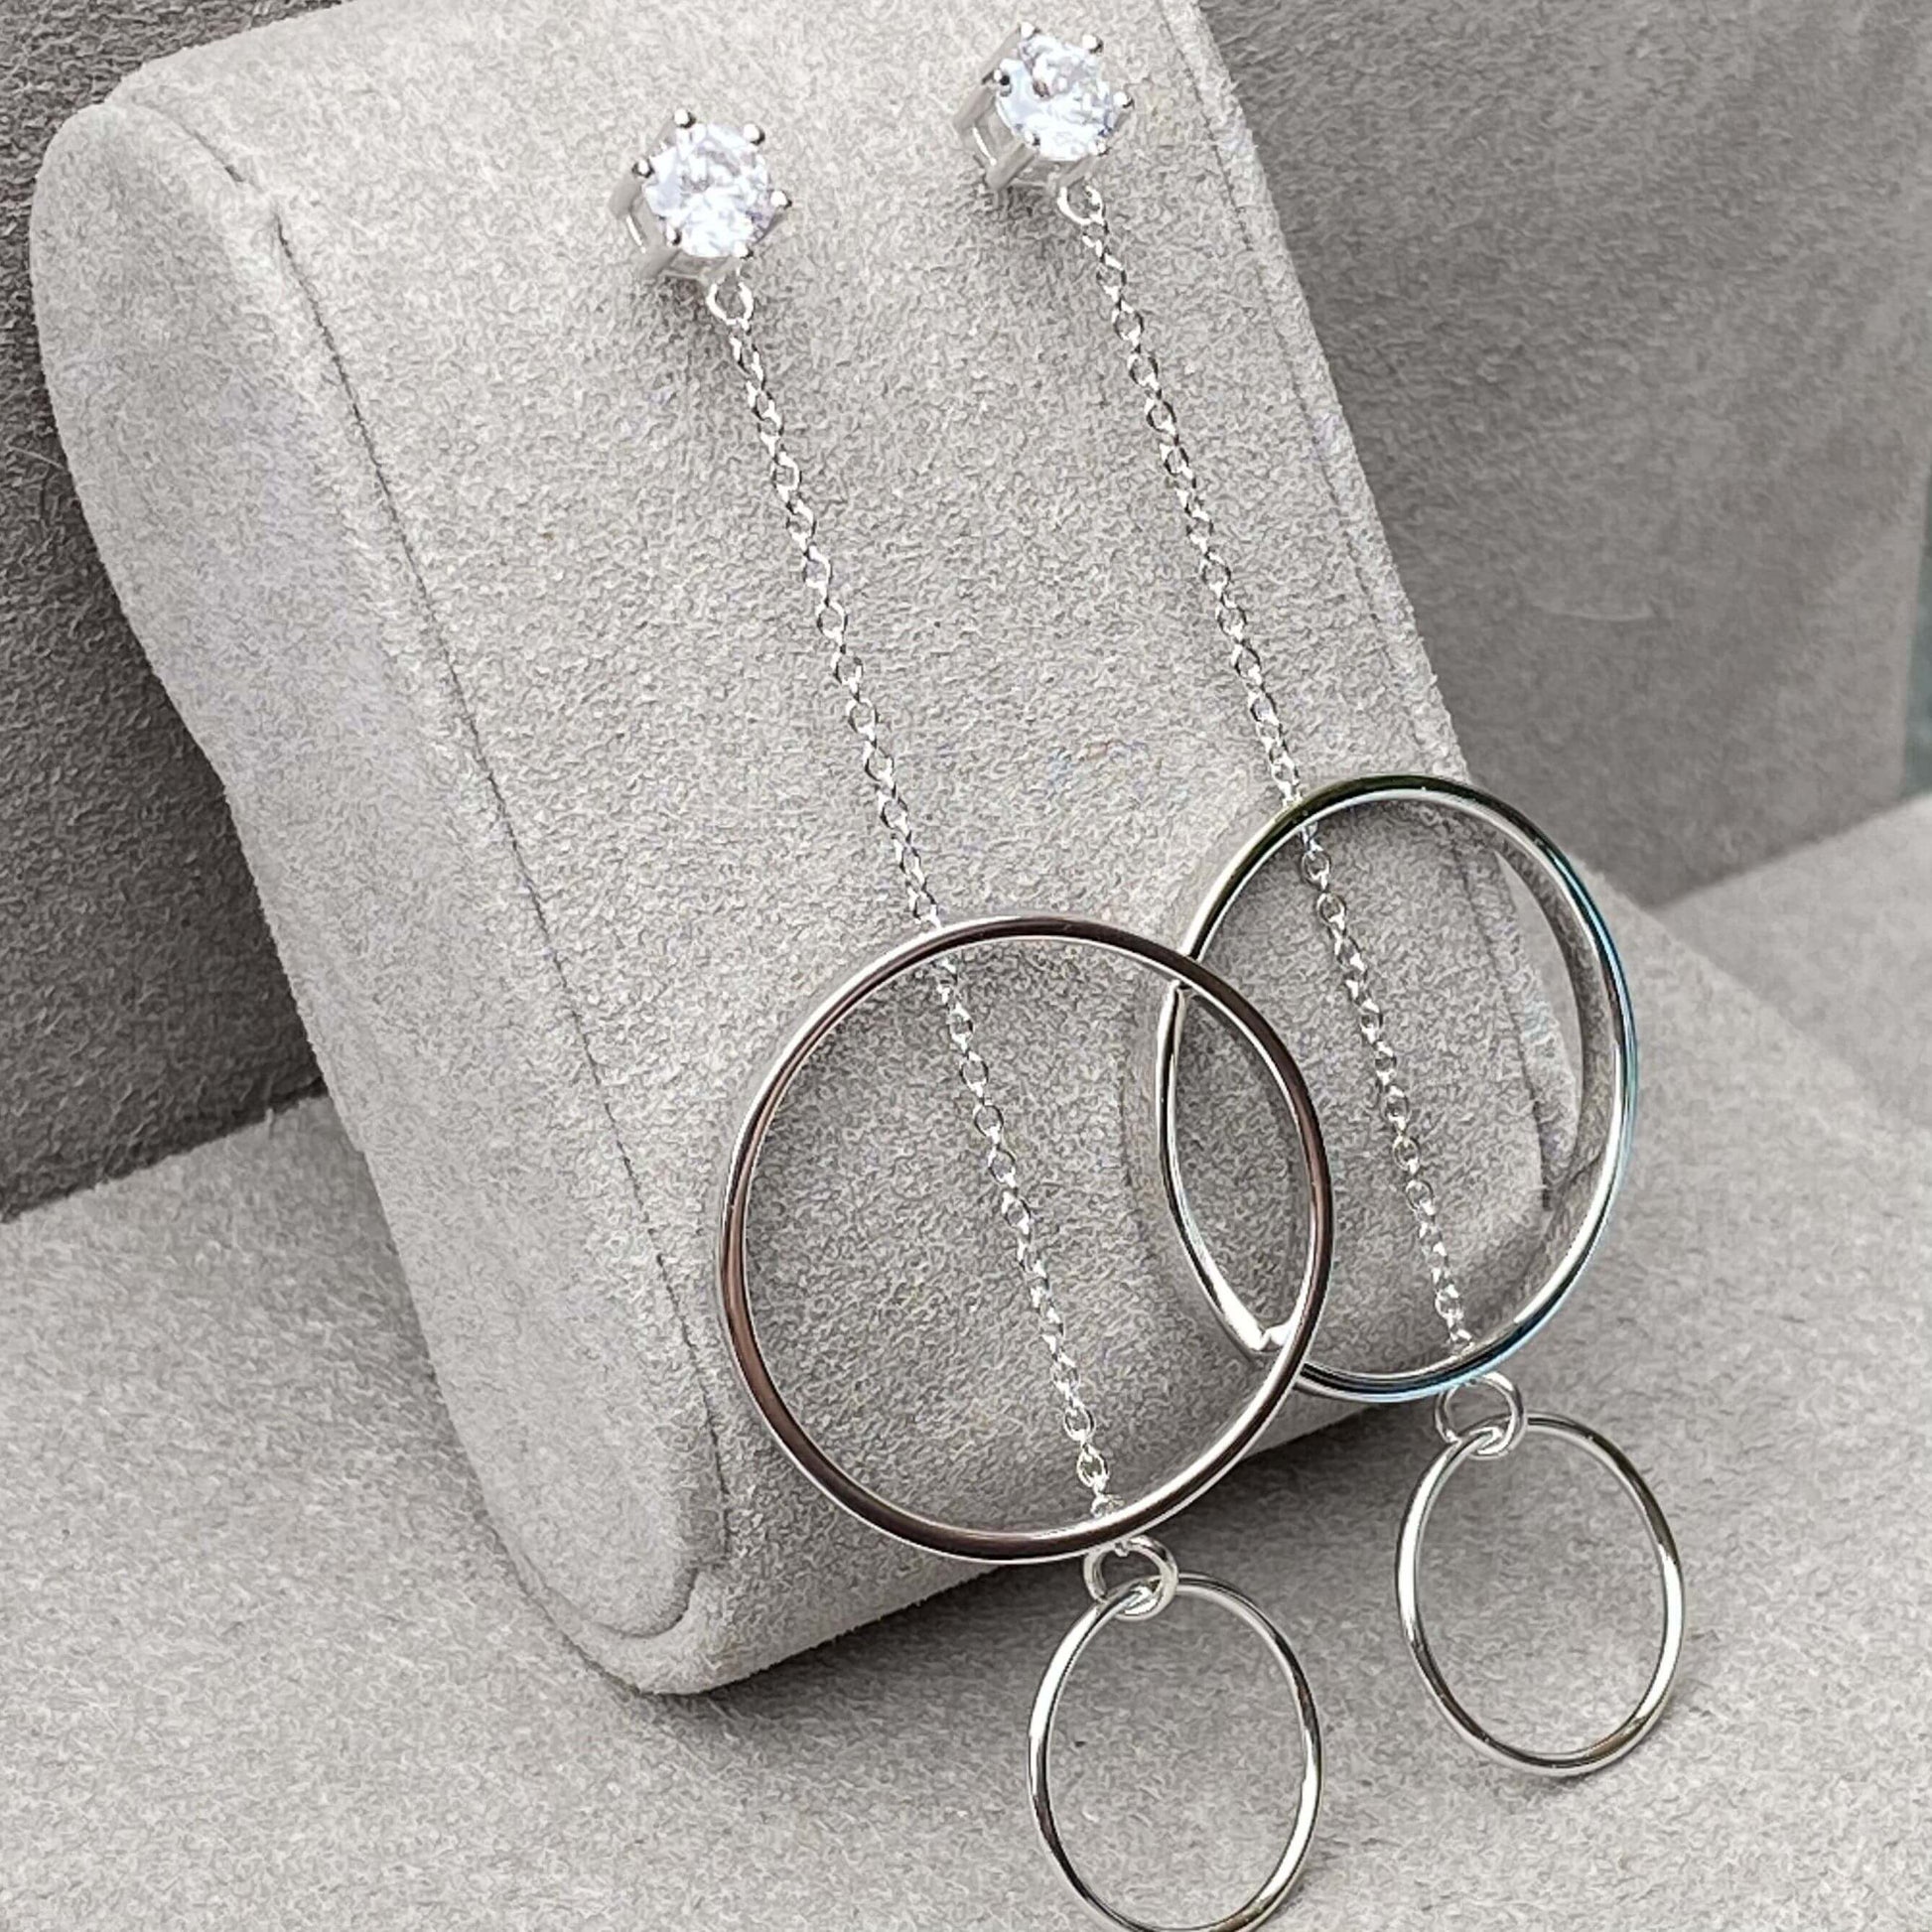 Suspended Circle Sterling Silver Solitaire Drop Earrings - Twelve Silver Trees